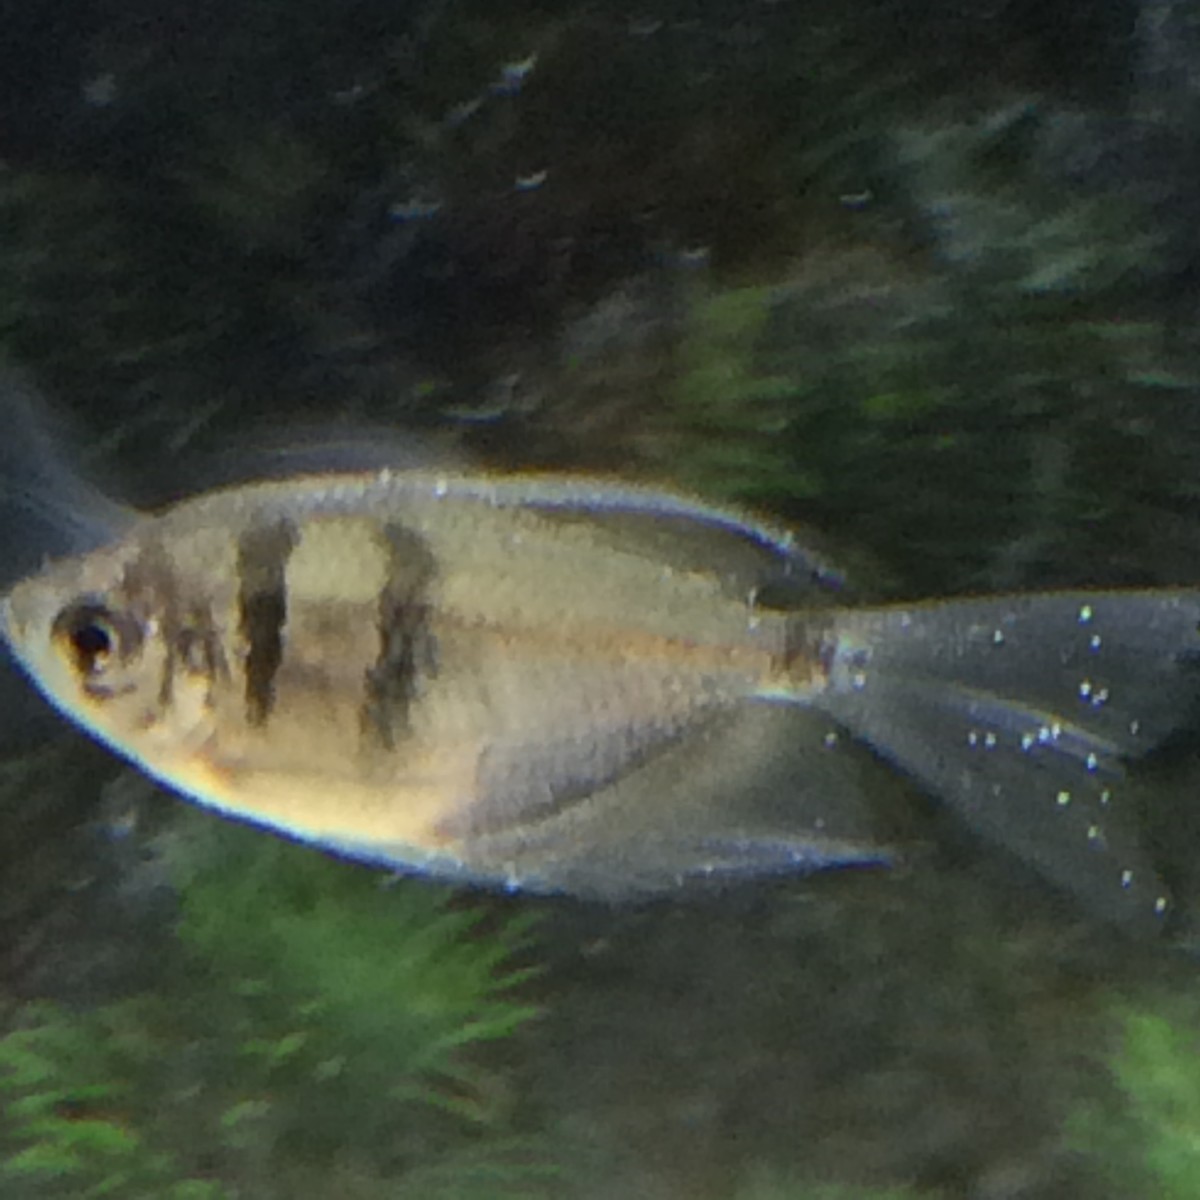 A fish with the parasite Ich (Ichthyophthirius multifiliis).